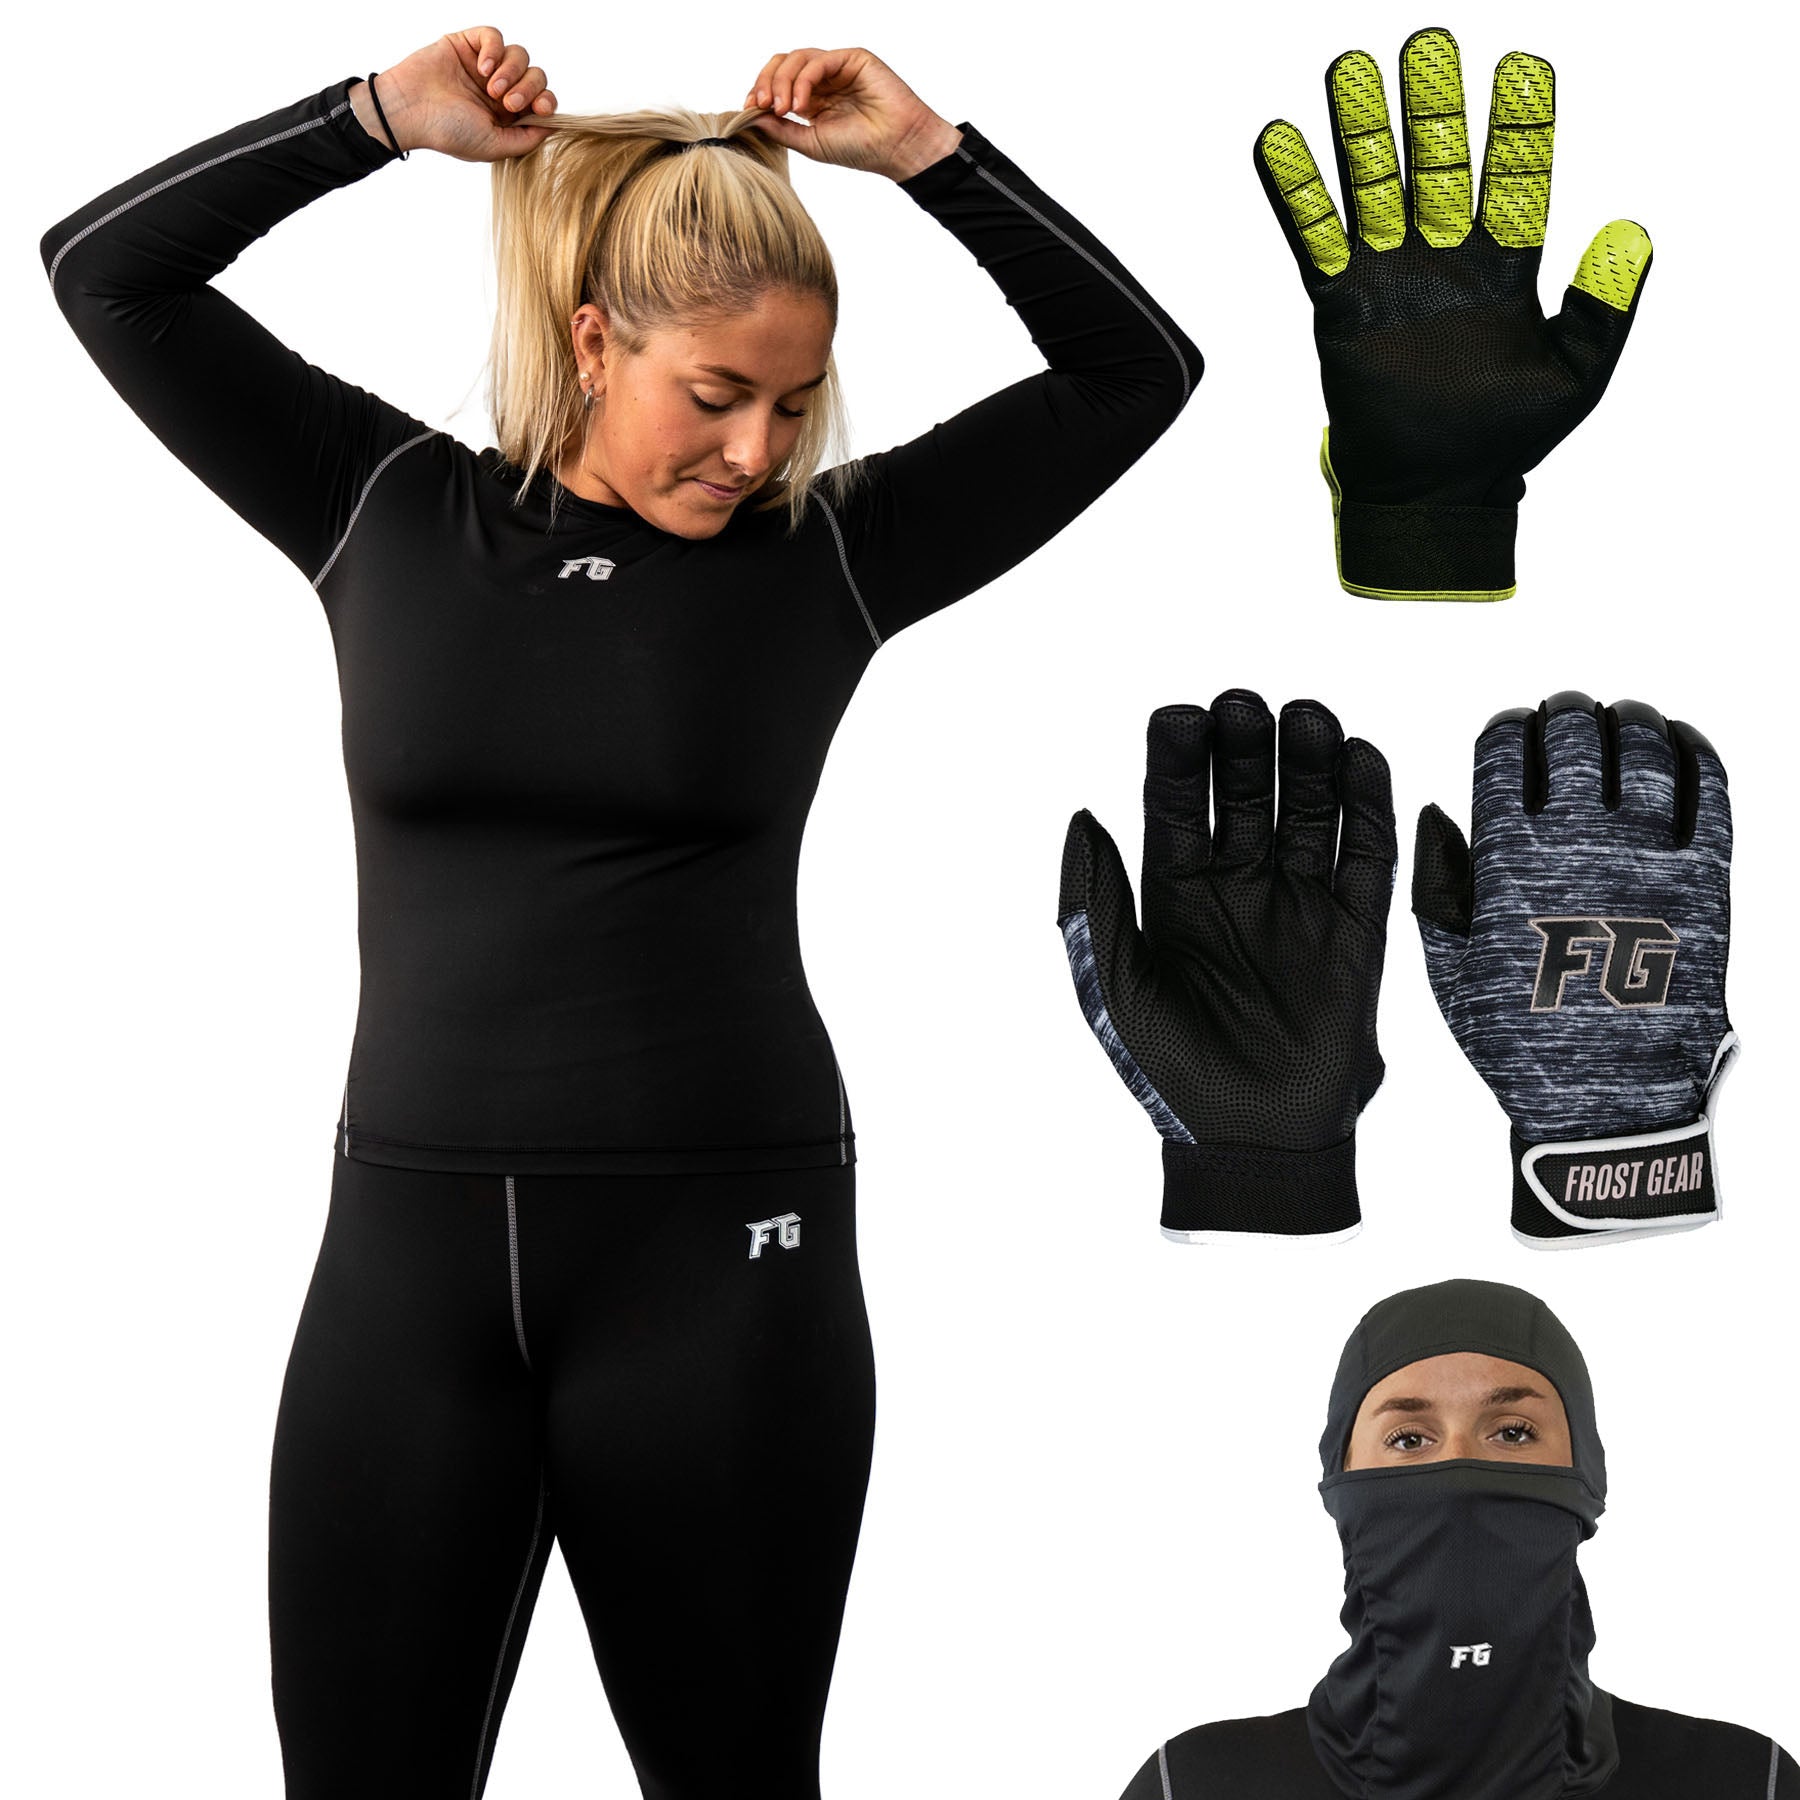 FG Cold Weather Performance Pack with Black Batting Gloves - Adult